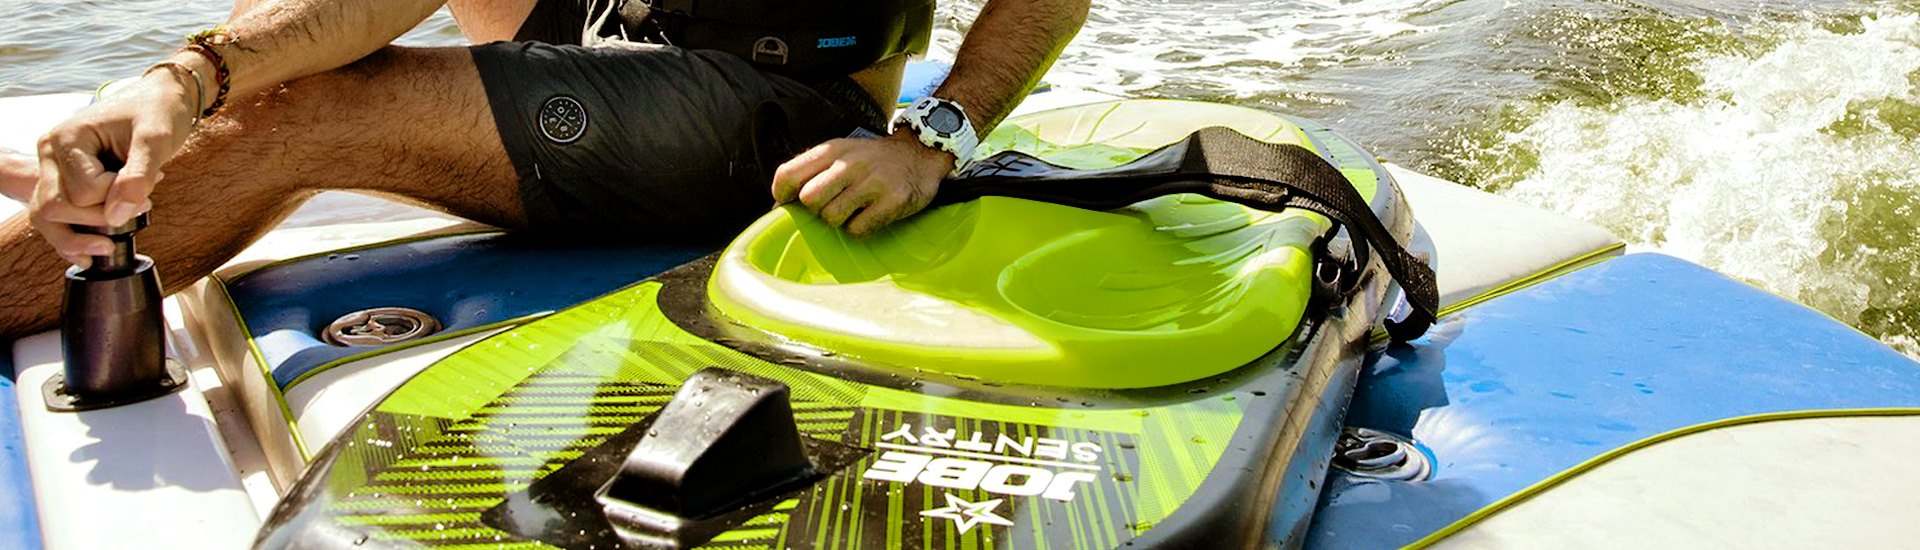 Kneeboards, Multi-position Boards & Towable Rafts Get You Moving on the Water